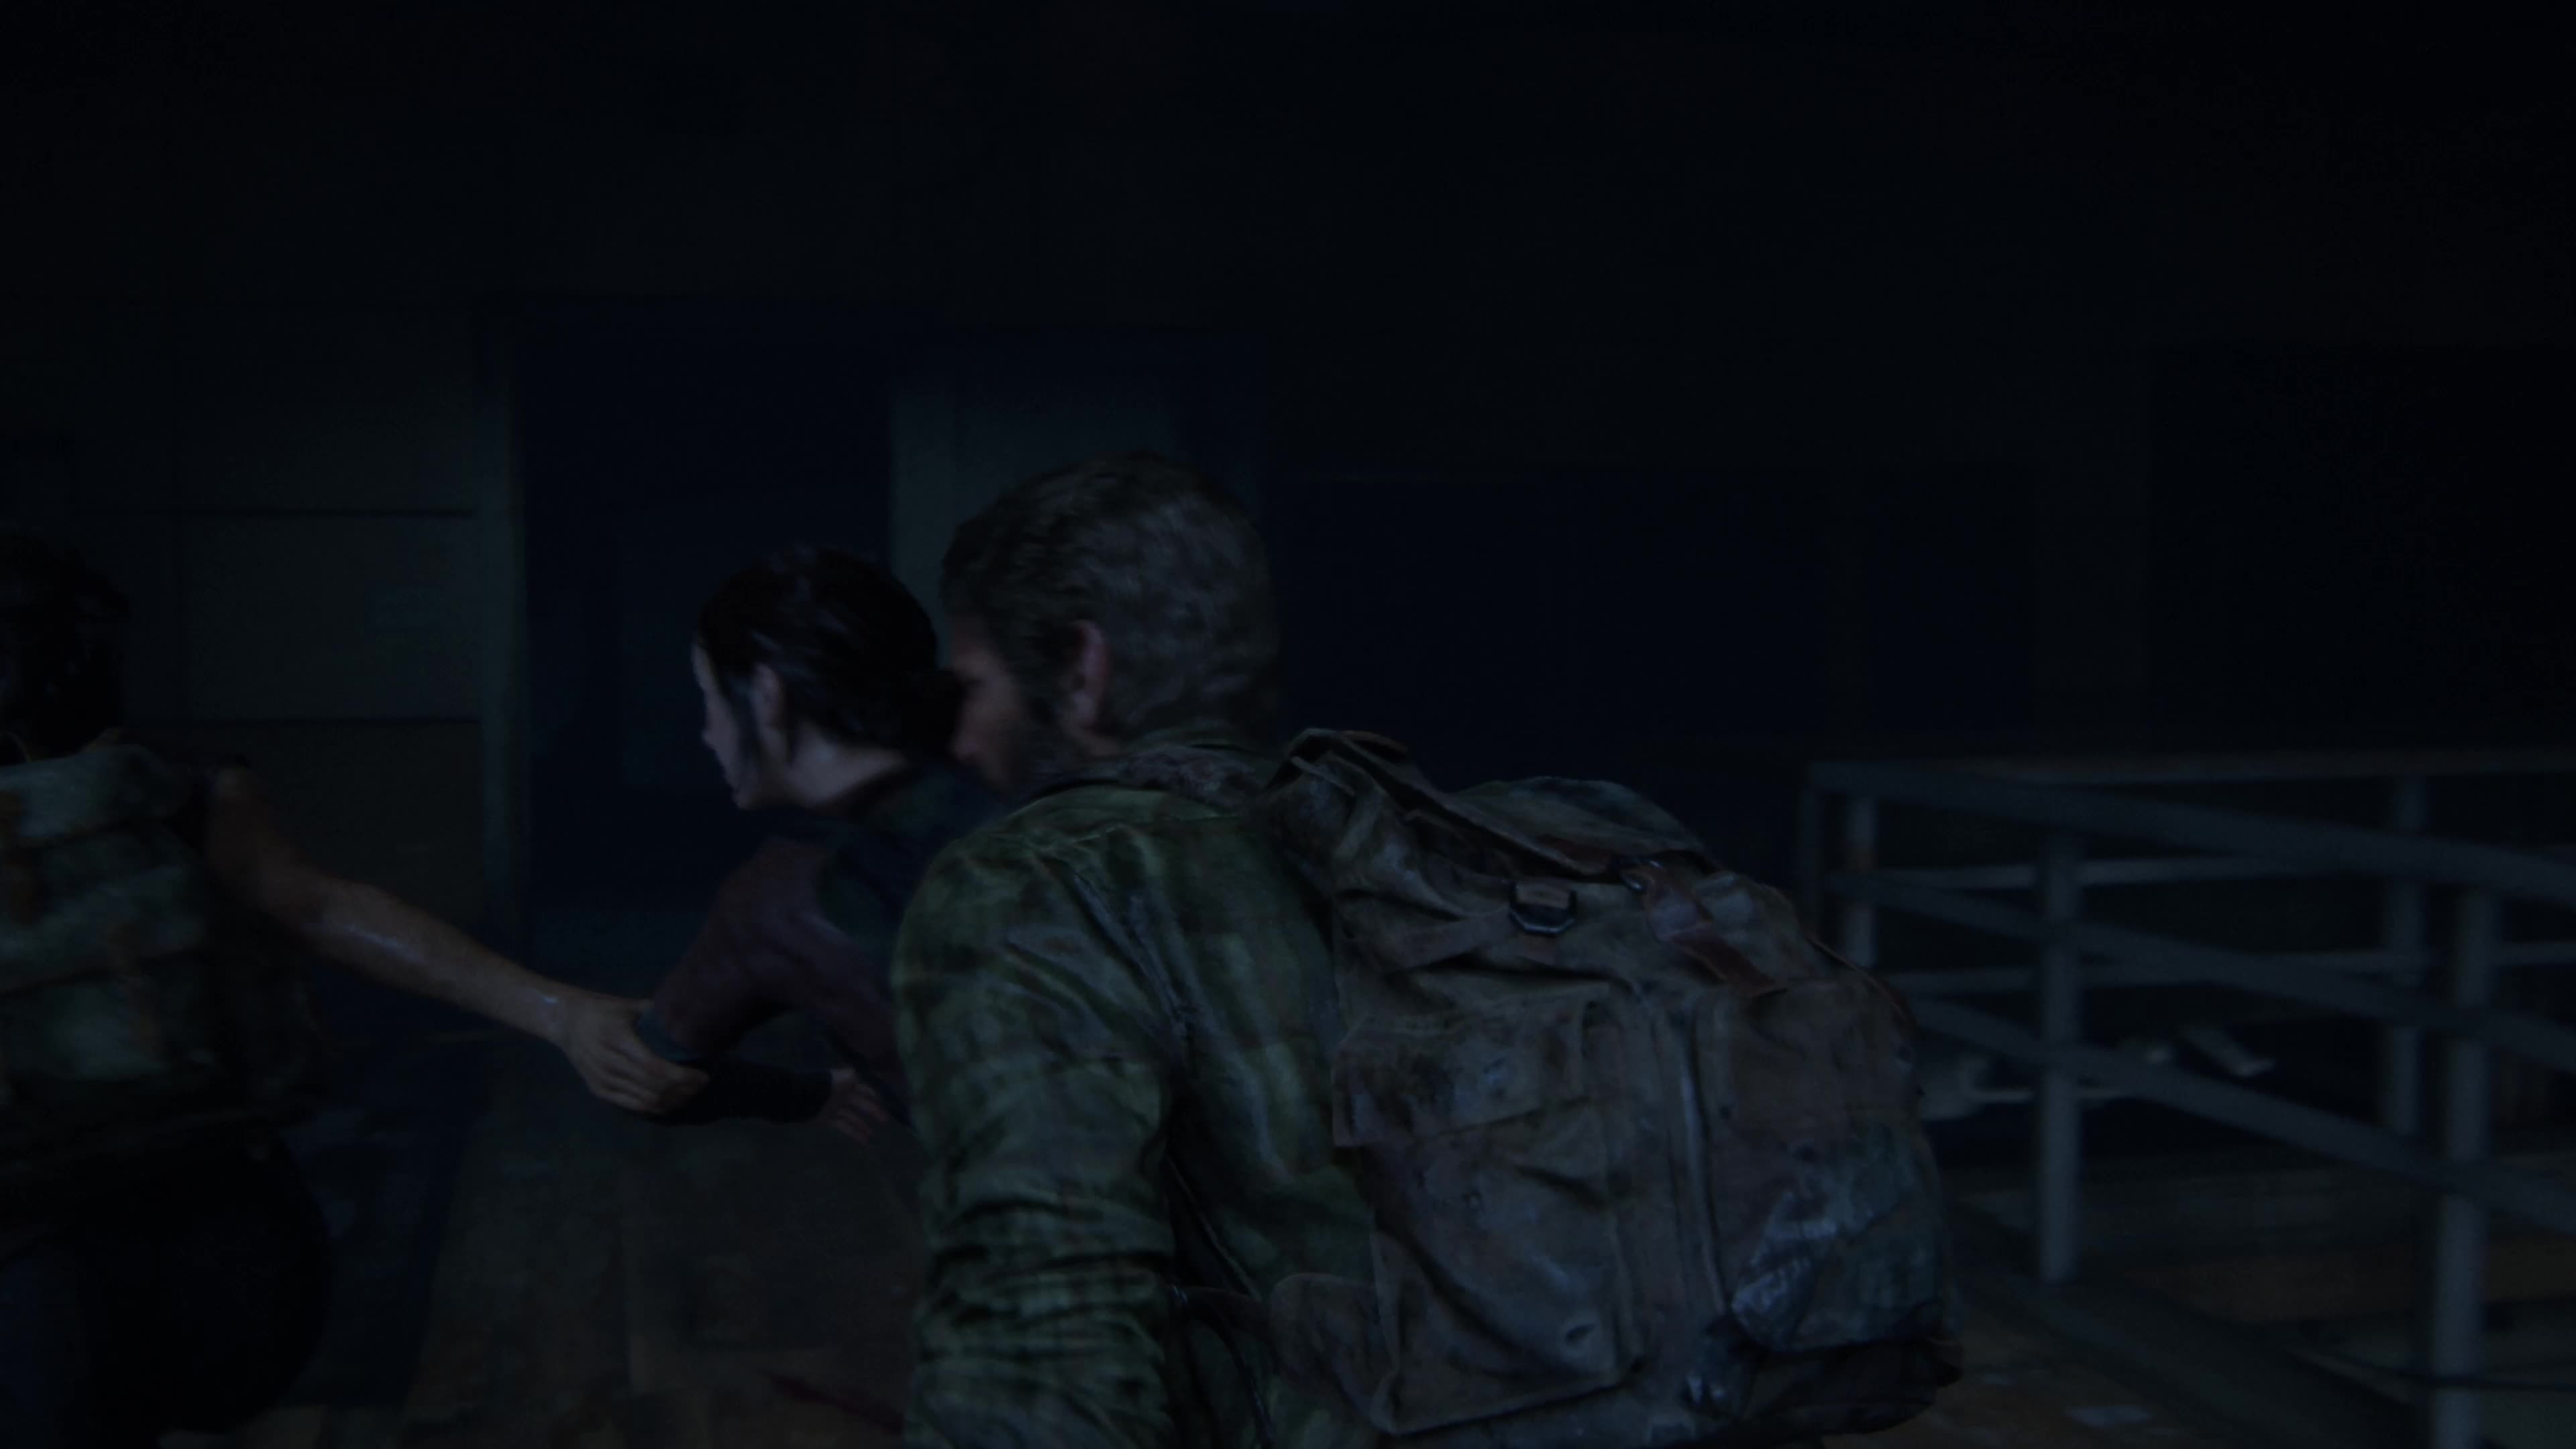 The Last of Us' remake is coming to PS5, PC - GadgetMatch